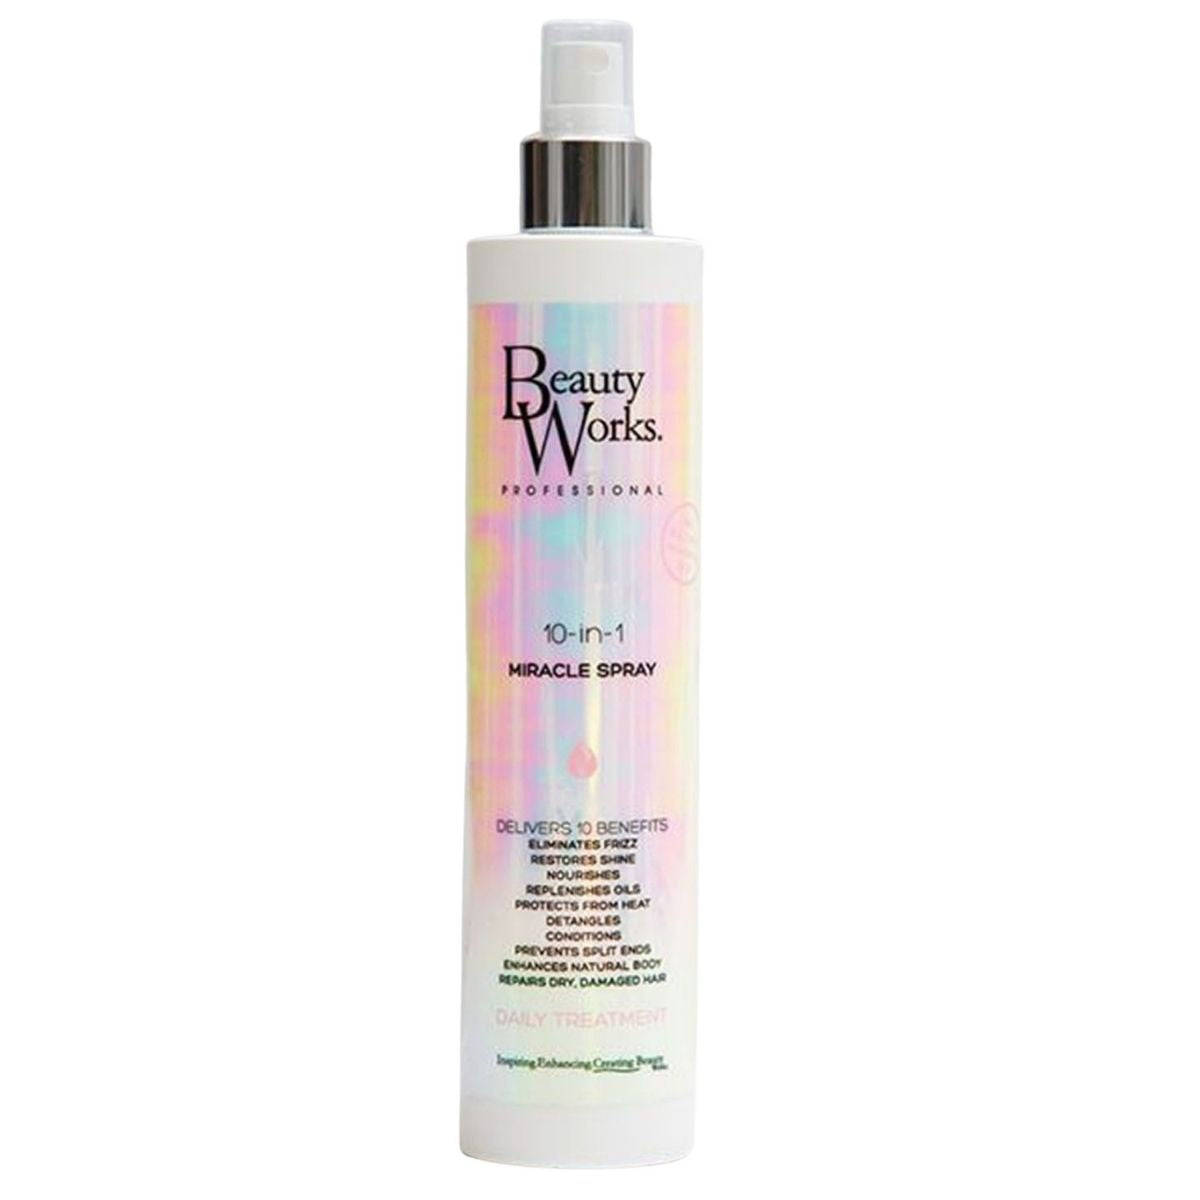 Beauty Works 10 In 1 Miracle Spray